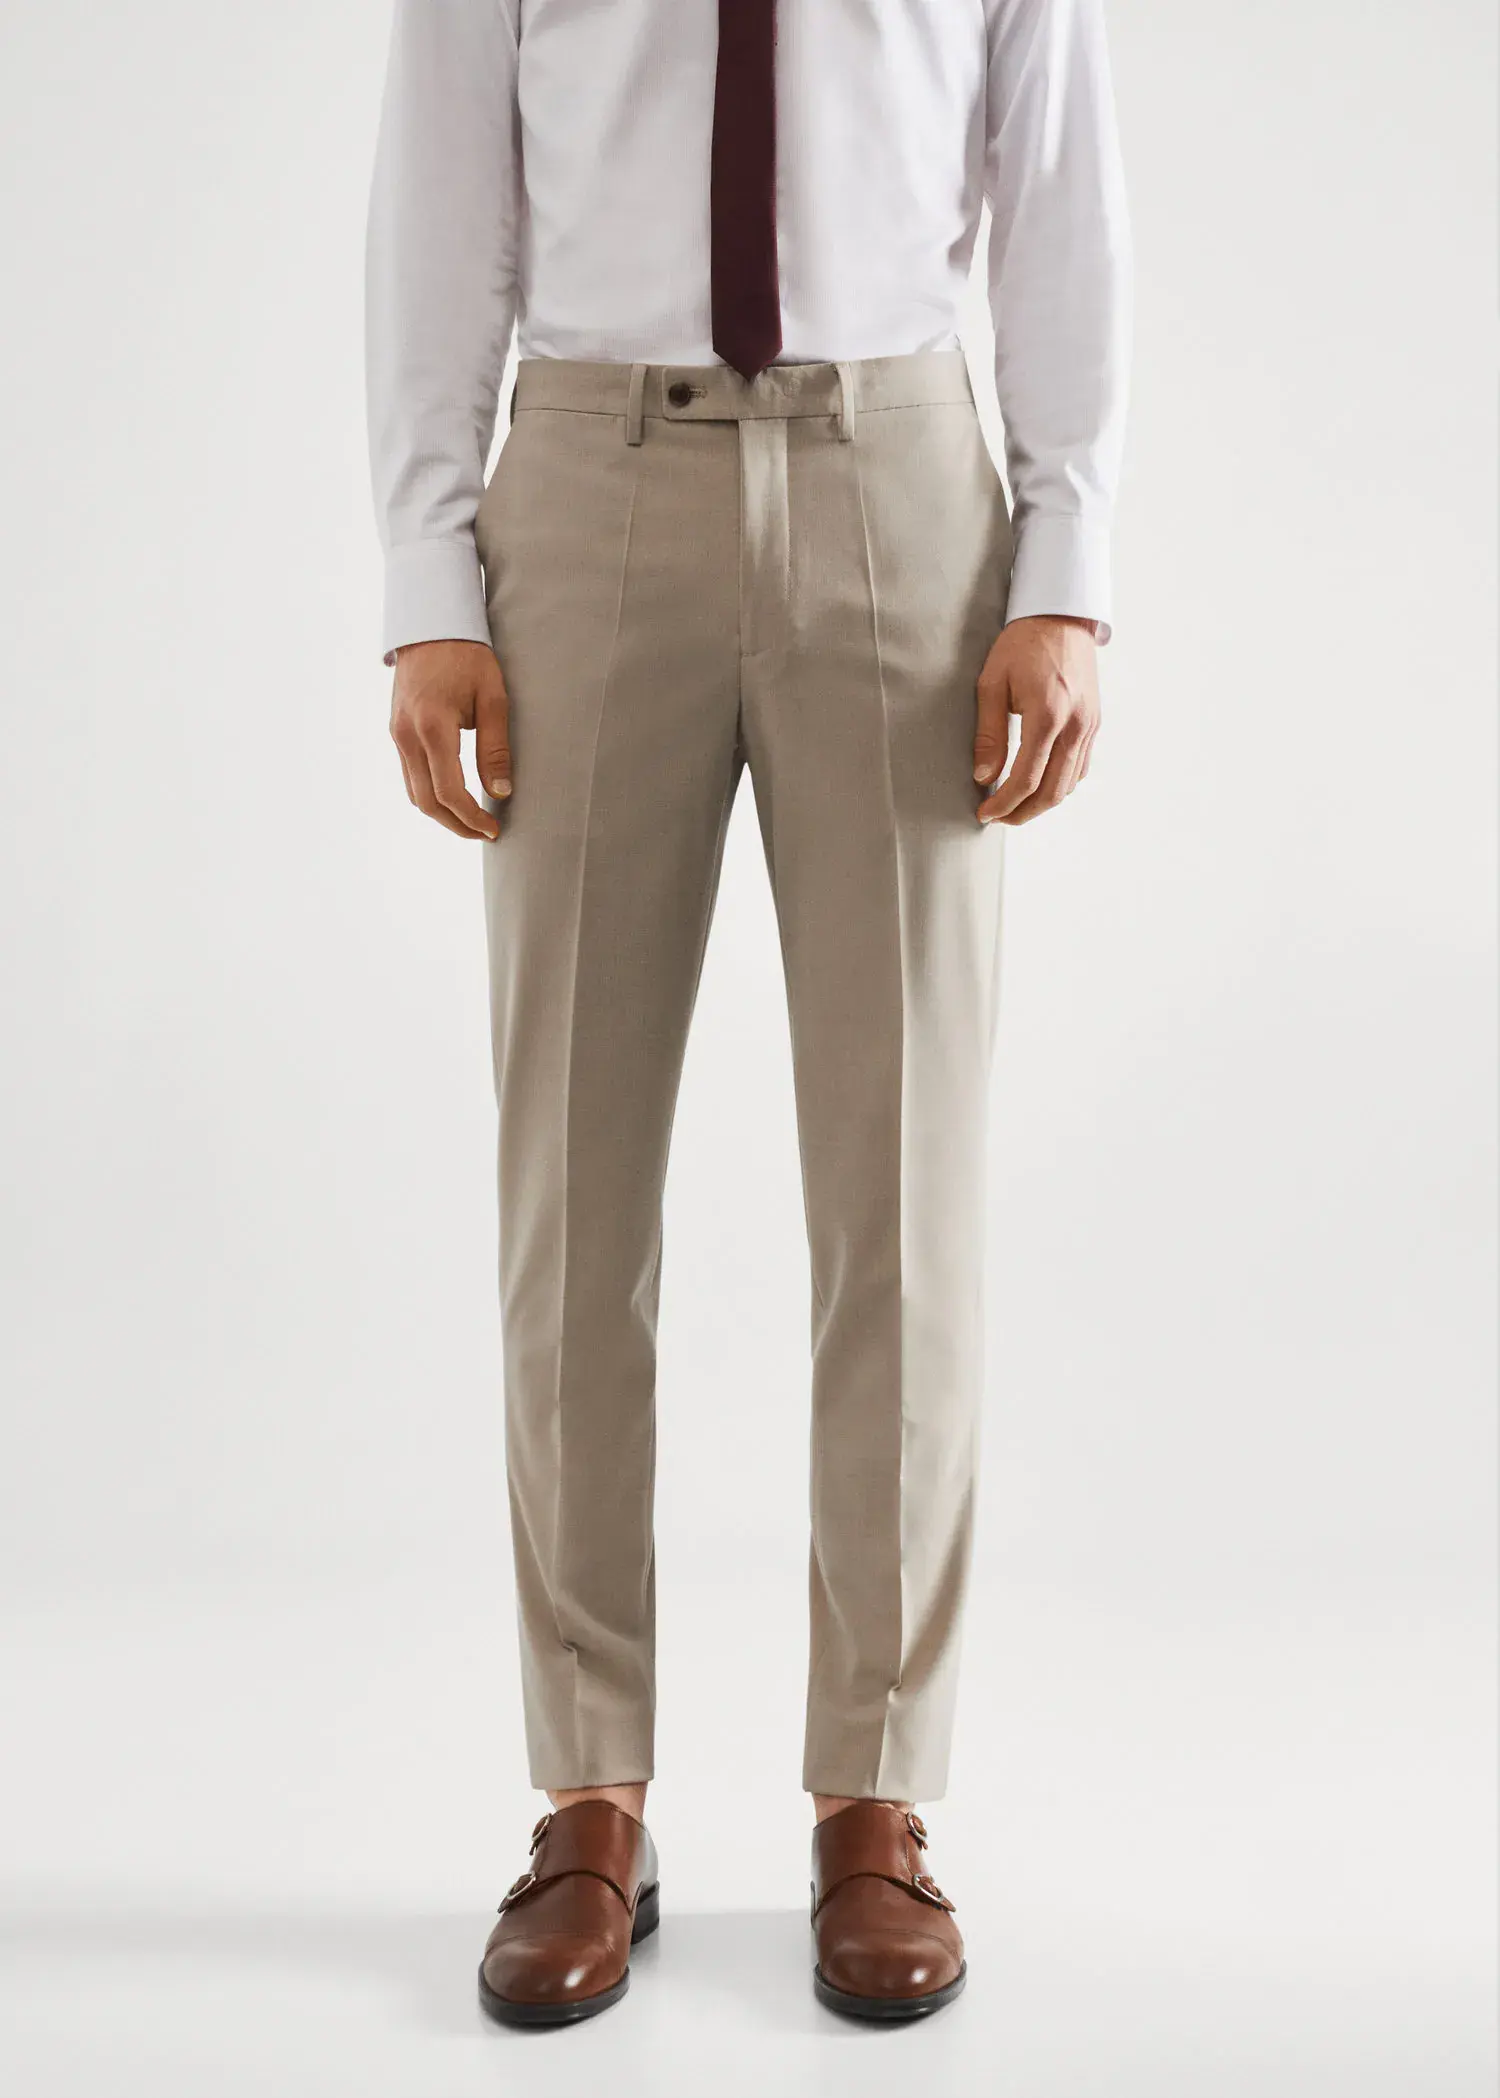 Mango Stretch fabric slim-fit suit pants. a man wearing a suit and tie standing in front of a white wall. 